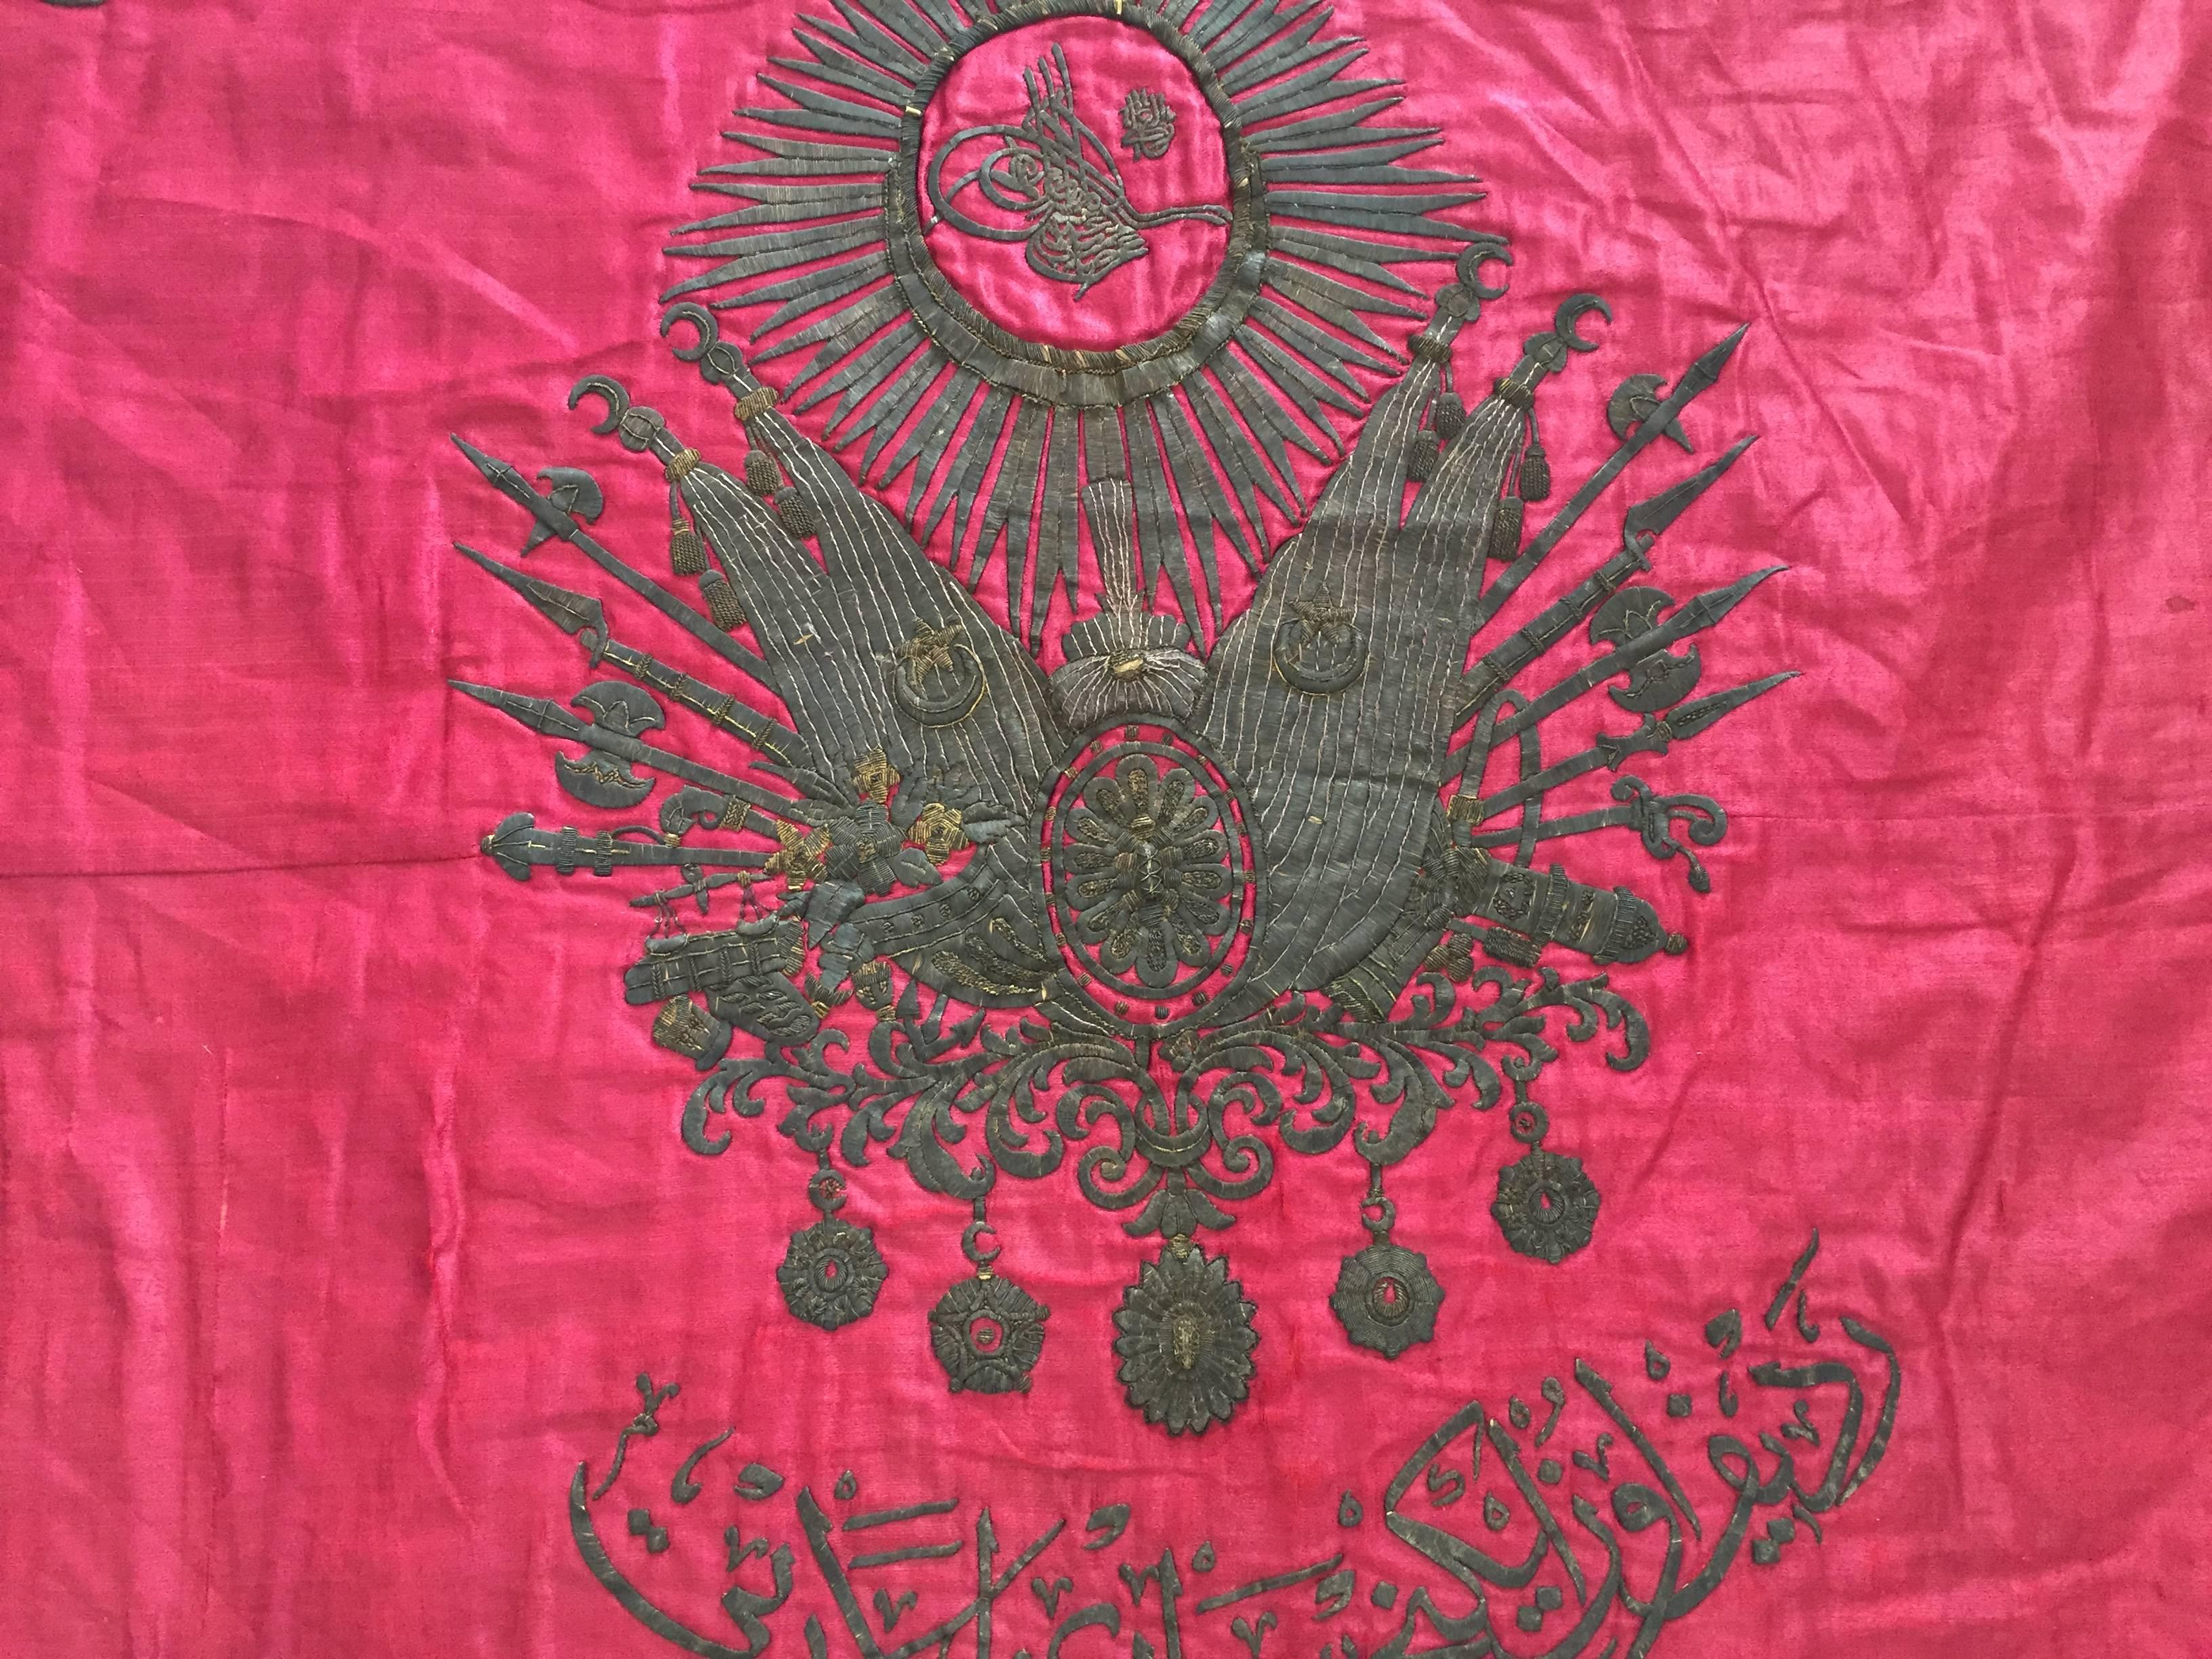 Turkish 19th Century Ottoman Banner with the Tugrah of Sultan Abdulhamid II